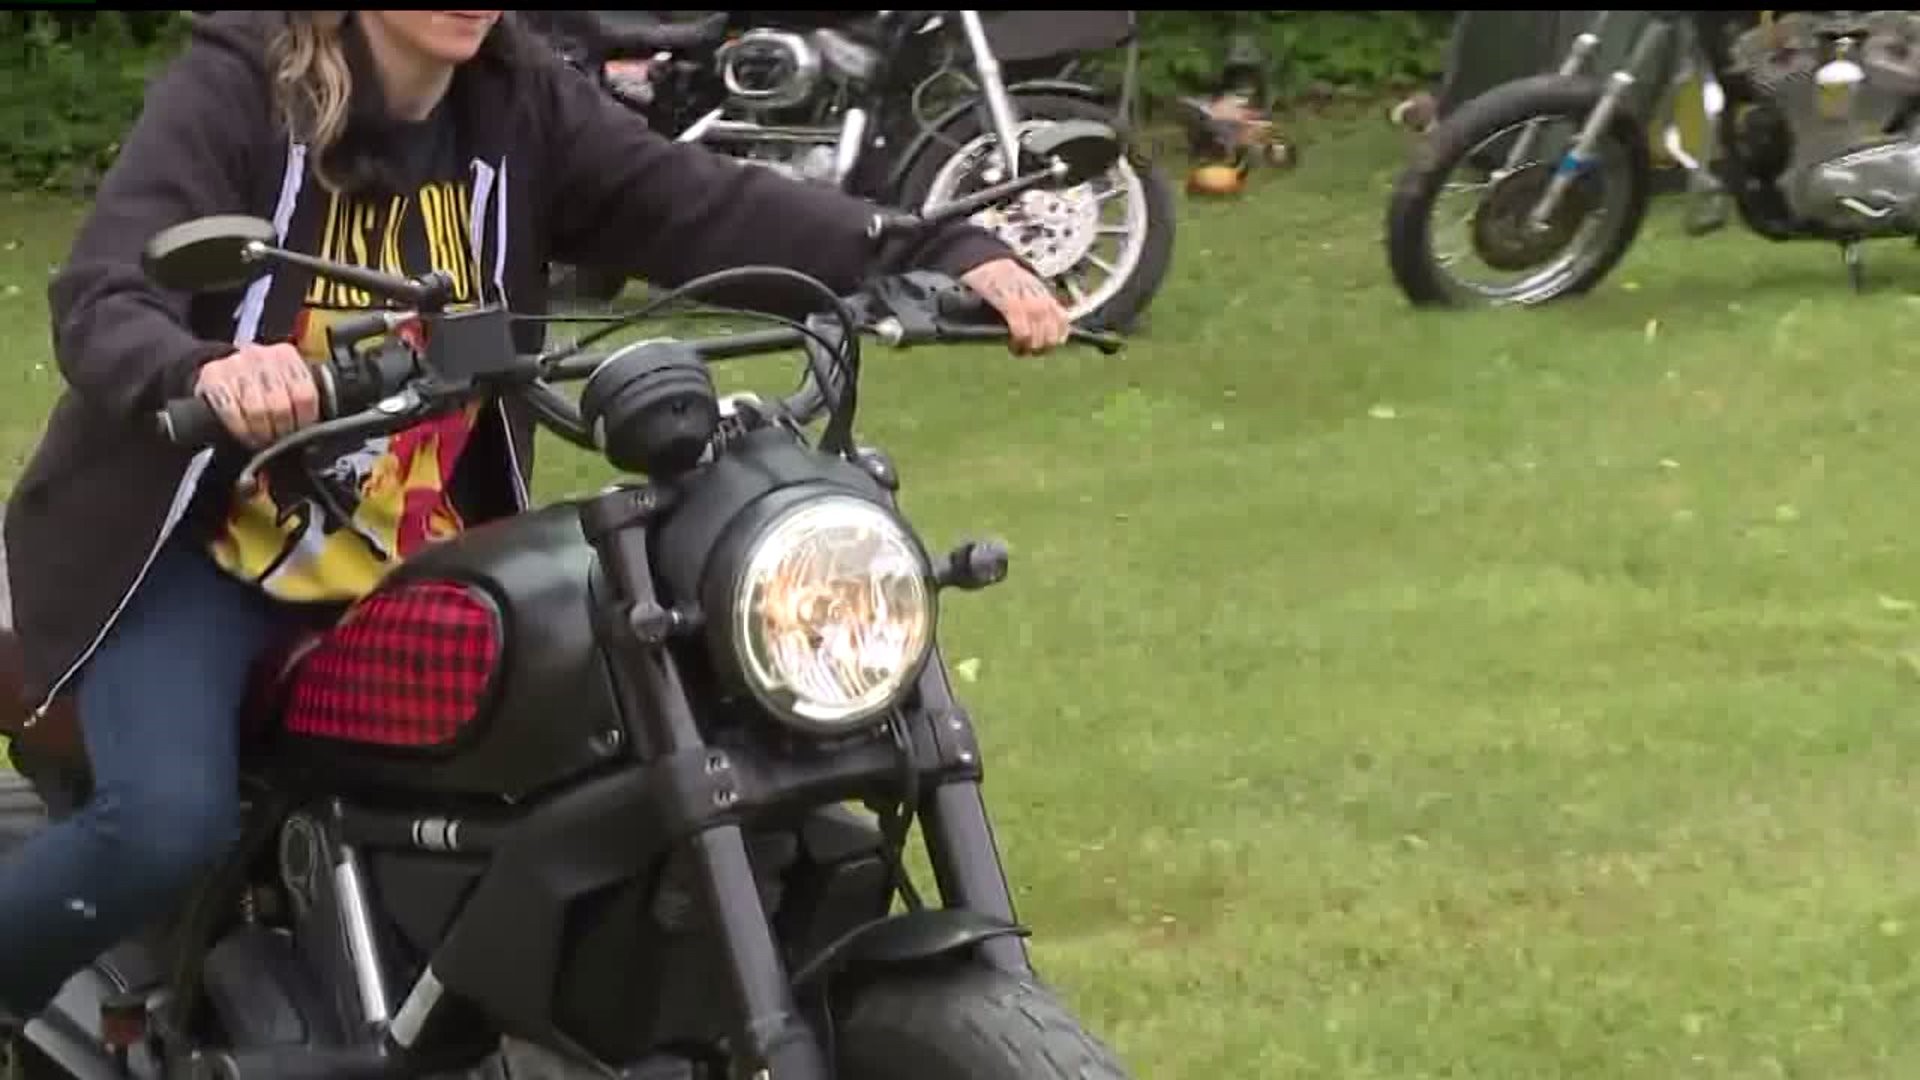 Fox Run Motorcyle Camp Out brings women riders together